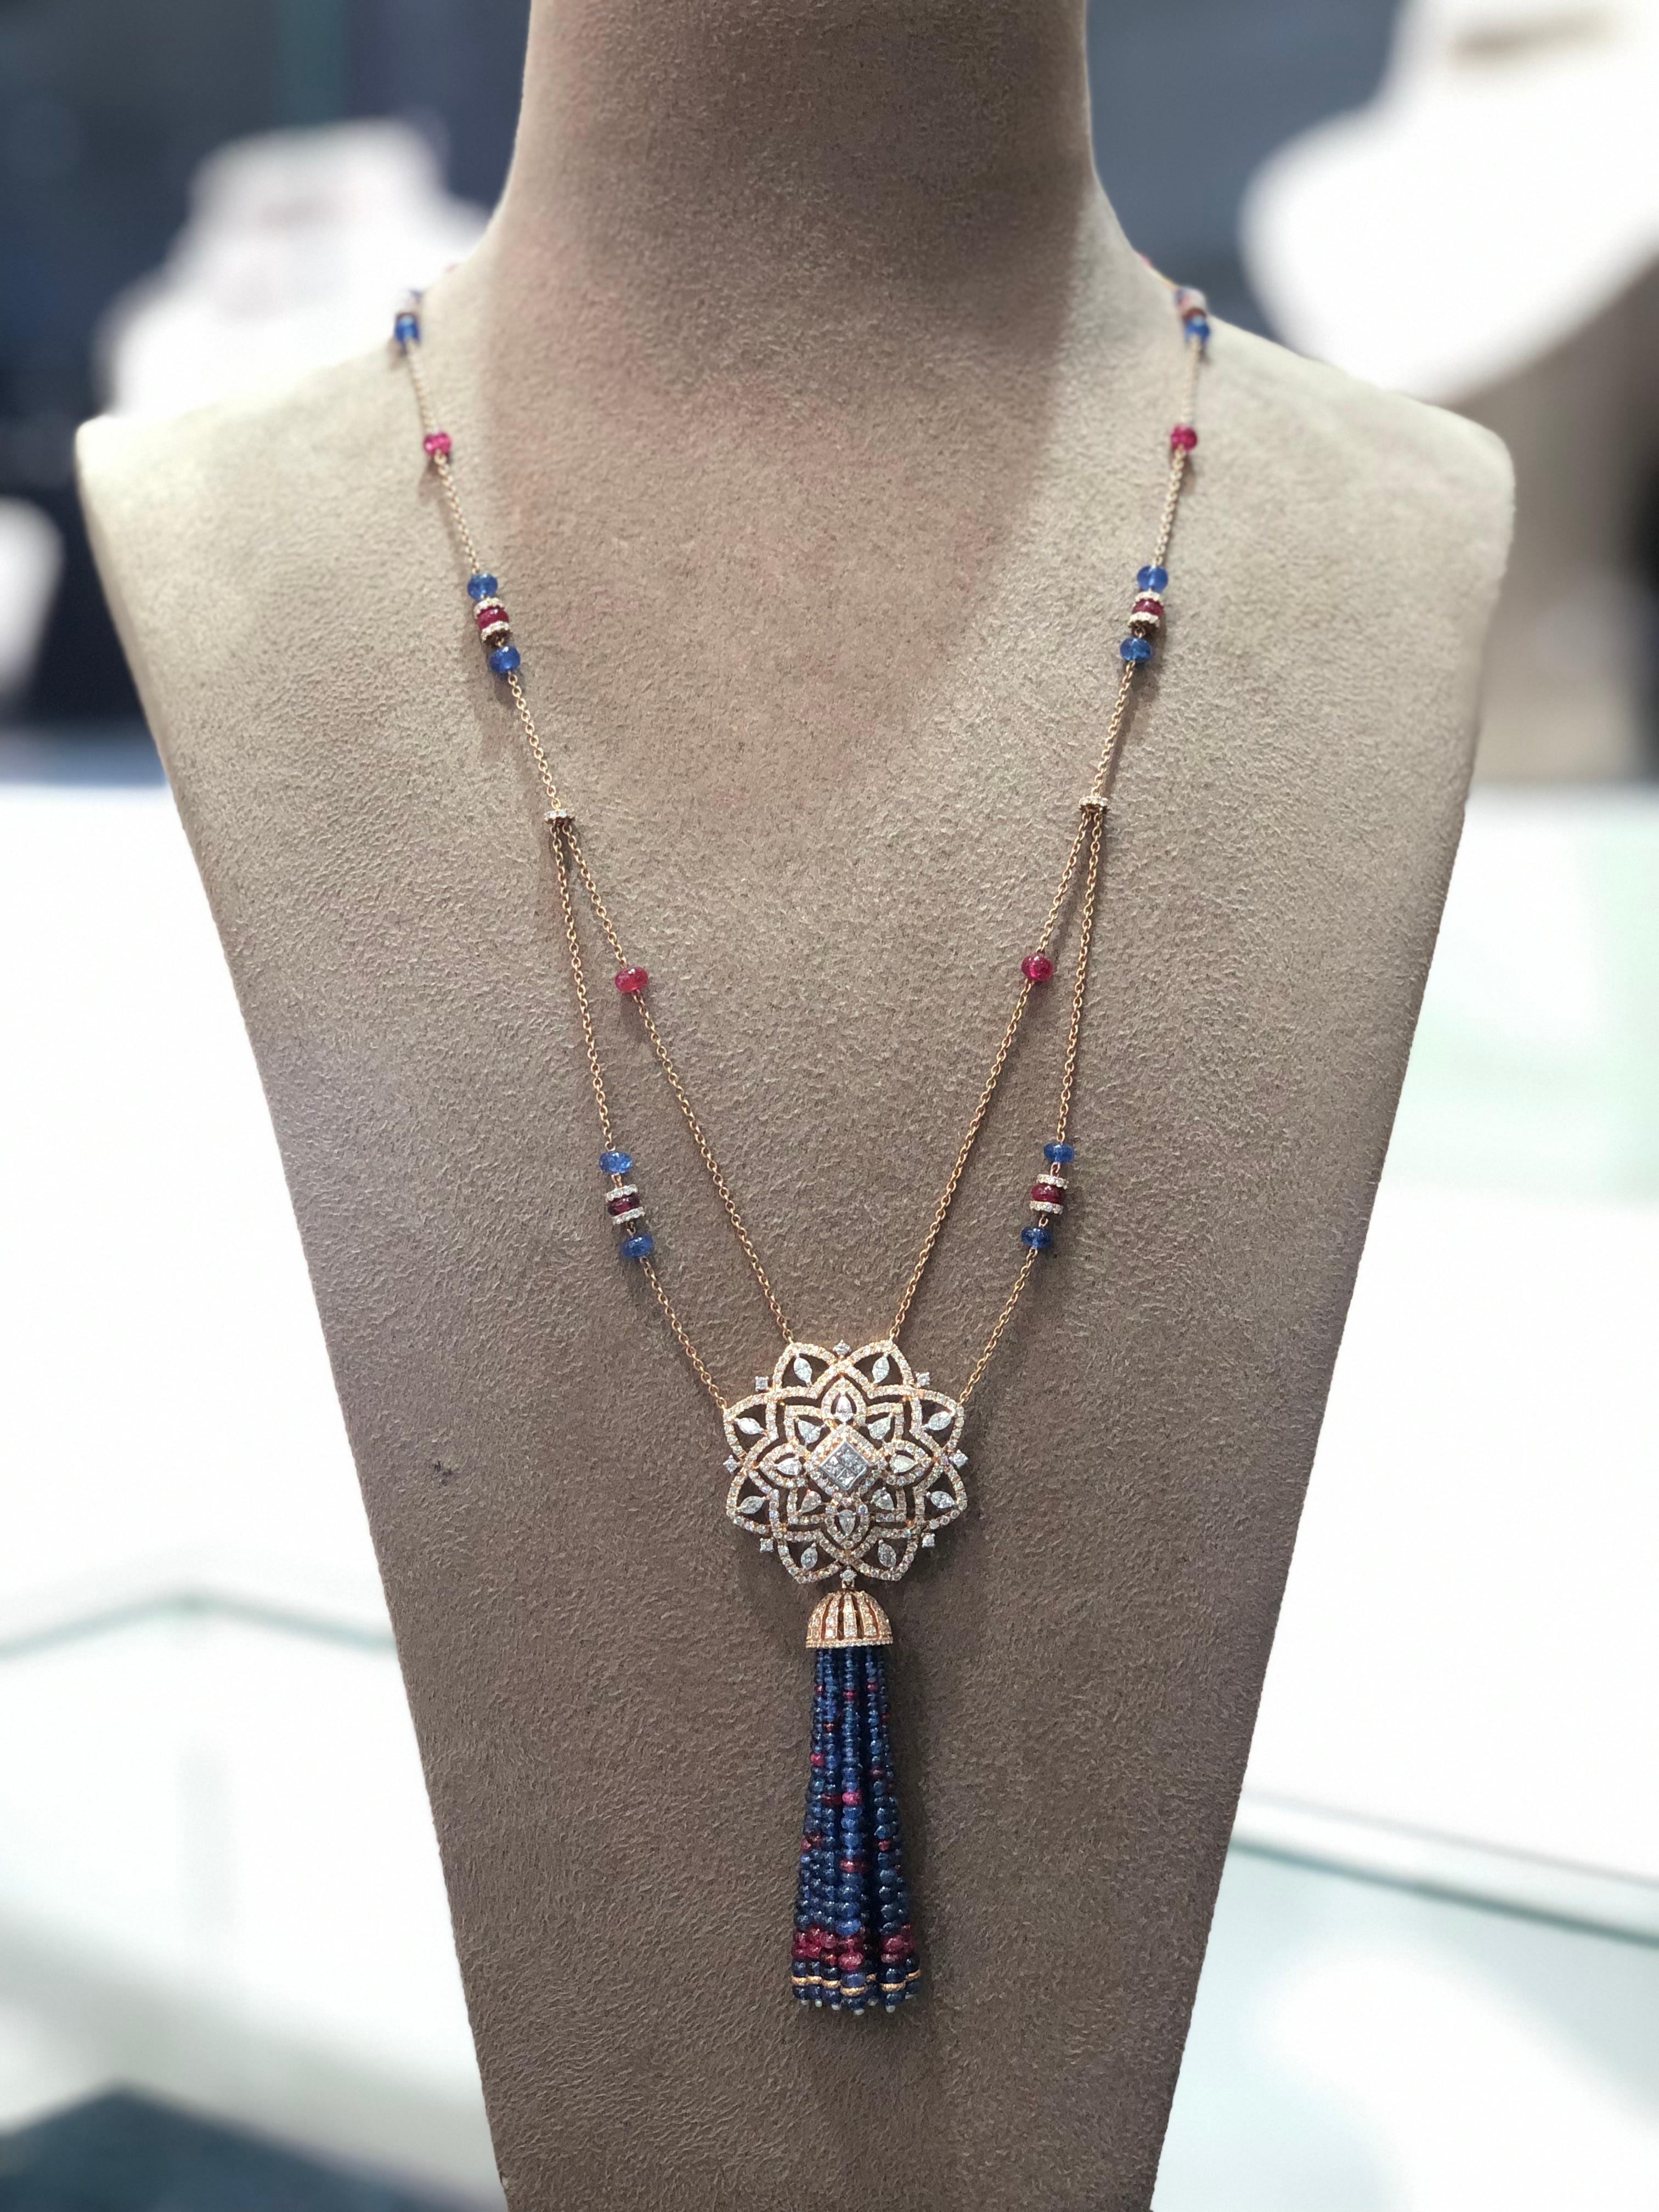 Diamonds: 5.38 carats
Sapphires: 20.69 carats
18kt Gold: 56.46 grams
Ref No: A@@

A beautiful and extraordinary diamond and twin colour tassel contemporary necklace which is perfect to wear over gowns.
